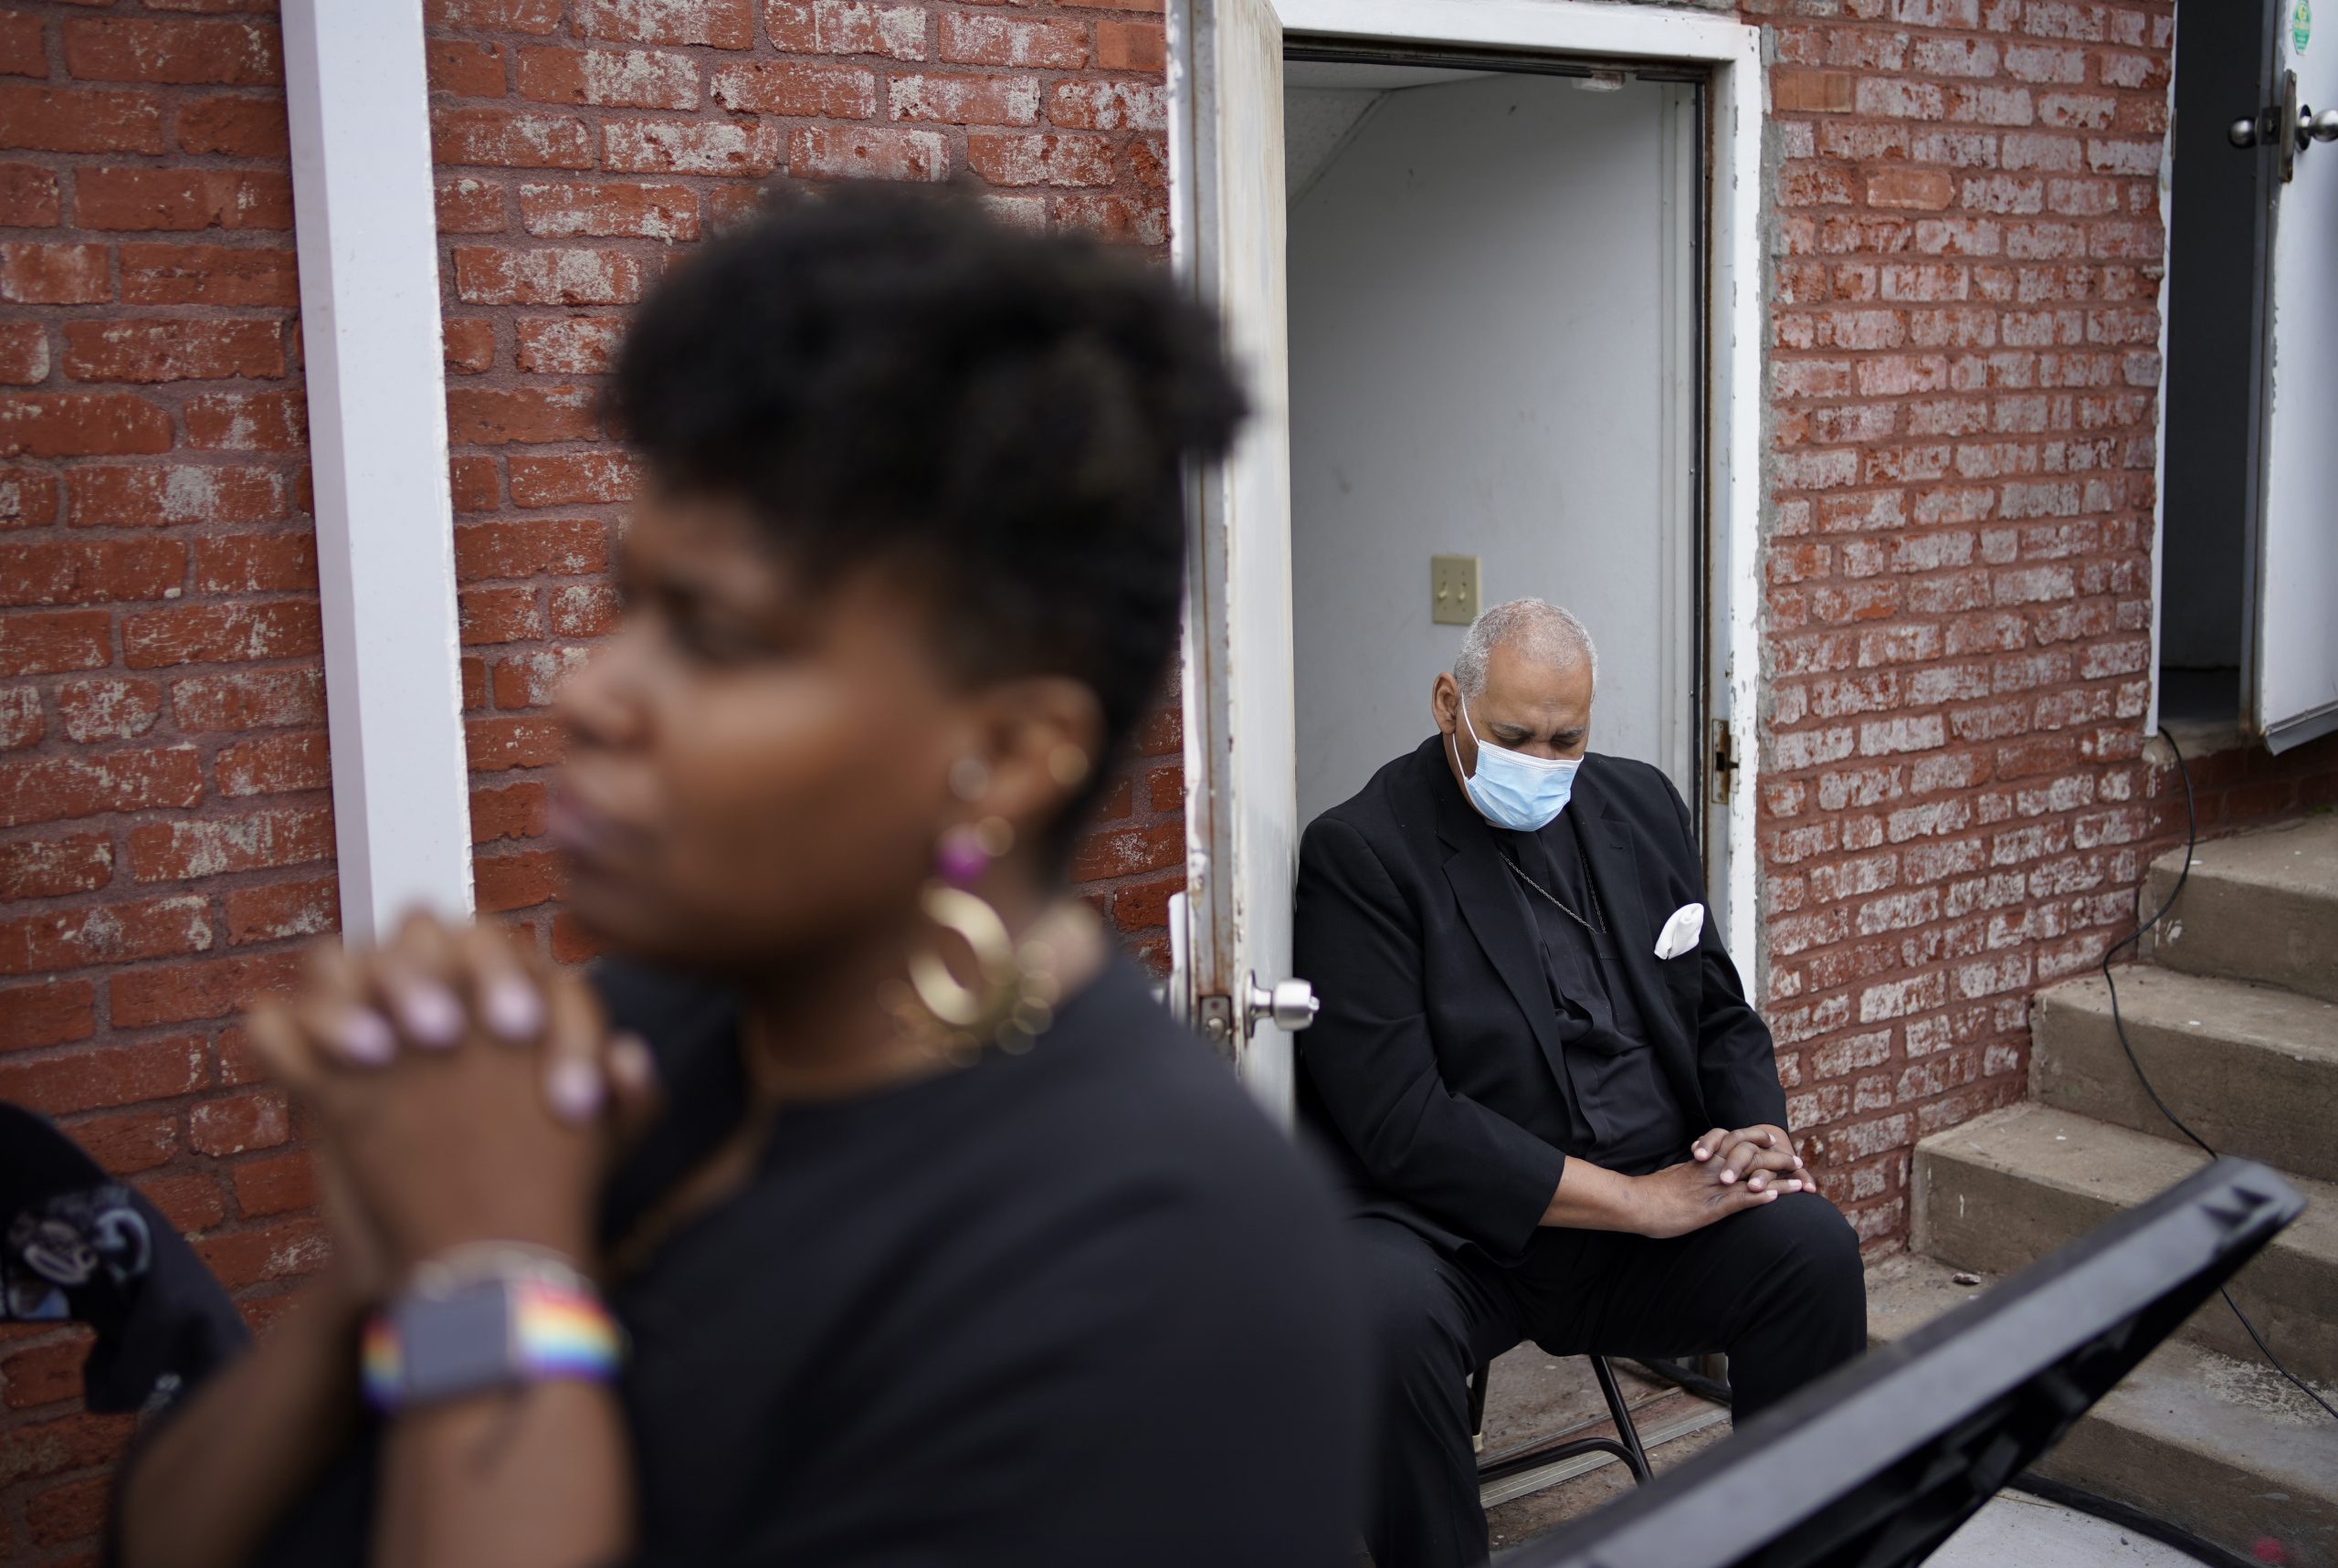 People pray during the dedication of a prayer wall at the historic Vernon African Methodist Episcopal Church in the Greenwood neighborhood during the centennial of the Tulsa Race Massacre, Monday, May 31, 2021, in Tulsa, Okla. The church was largely destroyed when a white mob descended on the prosperous Black neighborhood in 1921, burning, killing, looting and leveling a 35-square-block area. (AP Photo/John Locher)